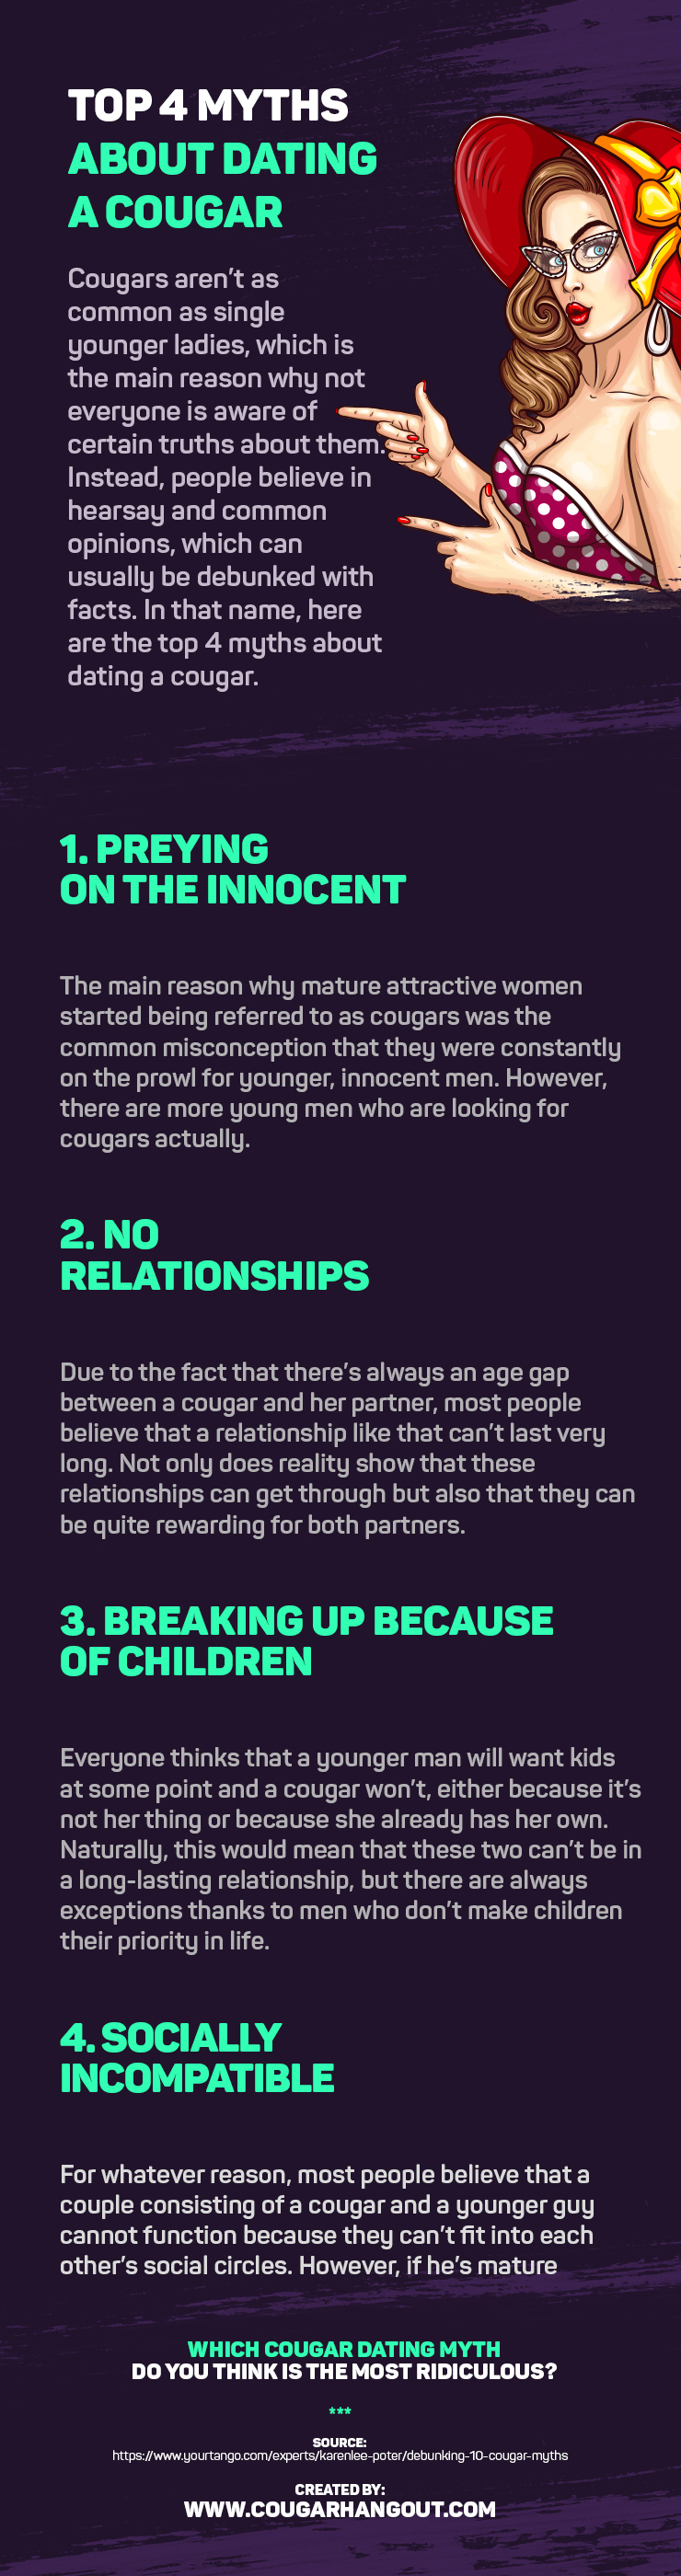 Top 4 Myths about Dating a Cougar